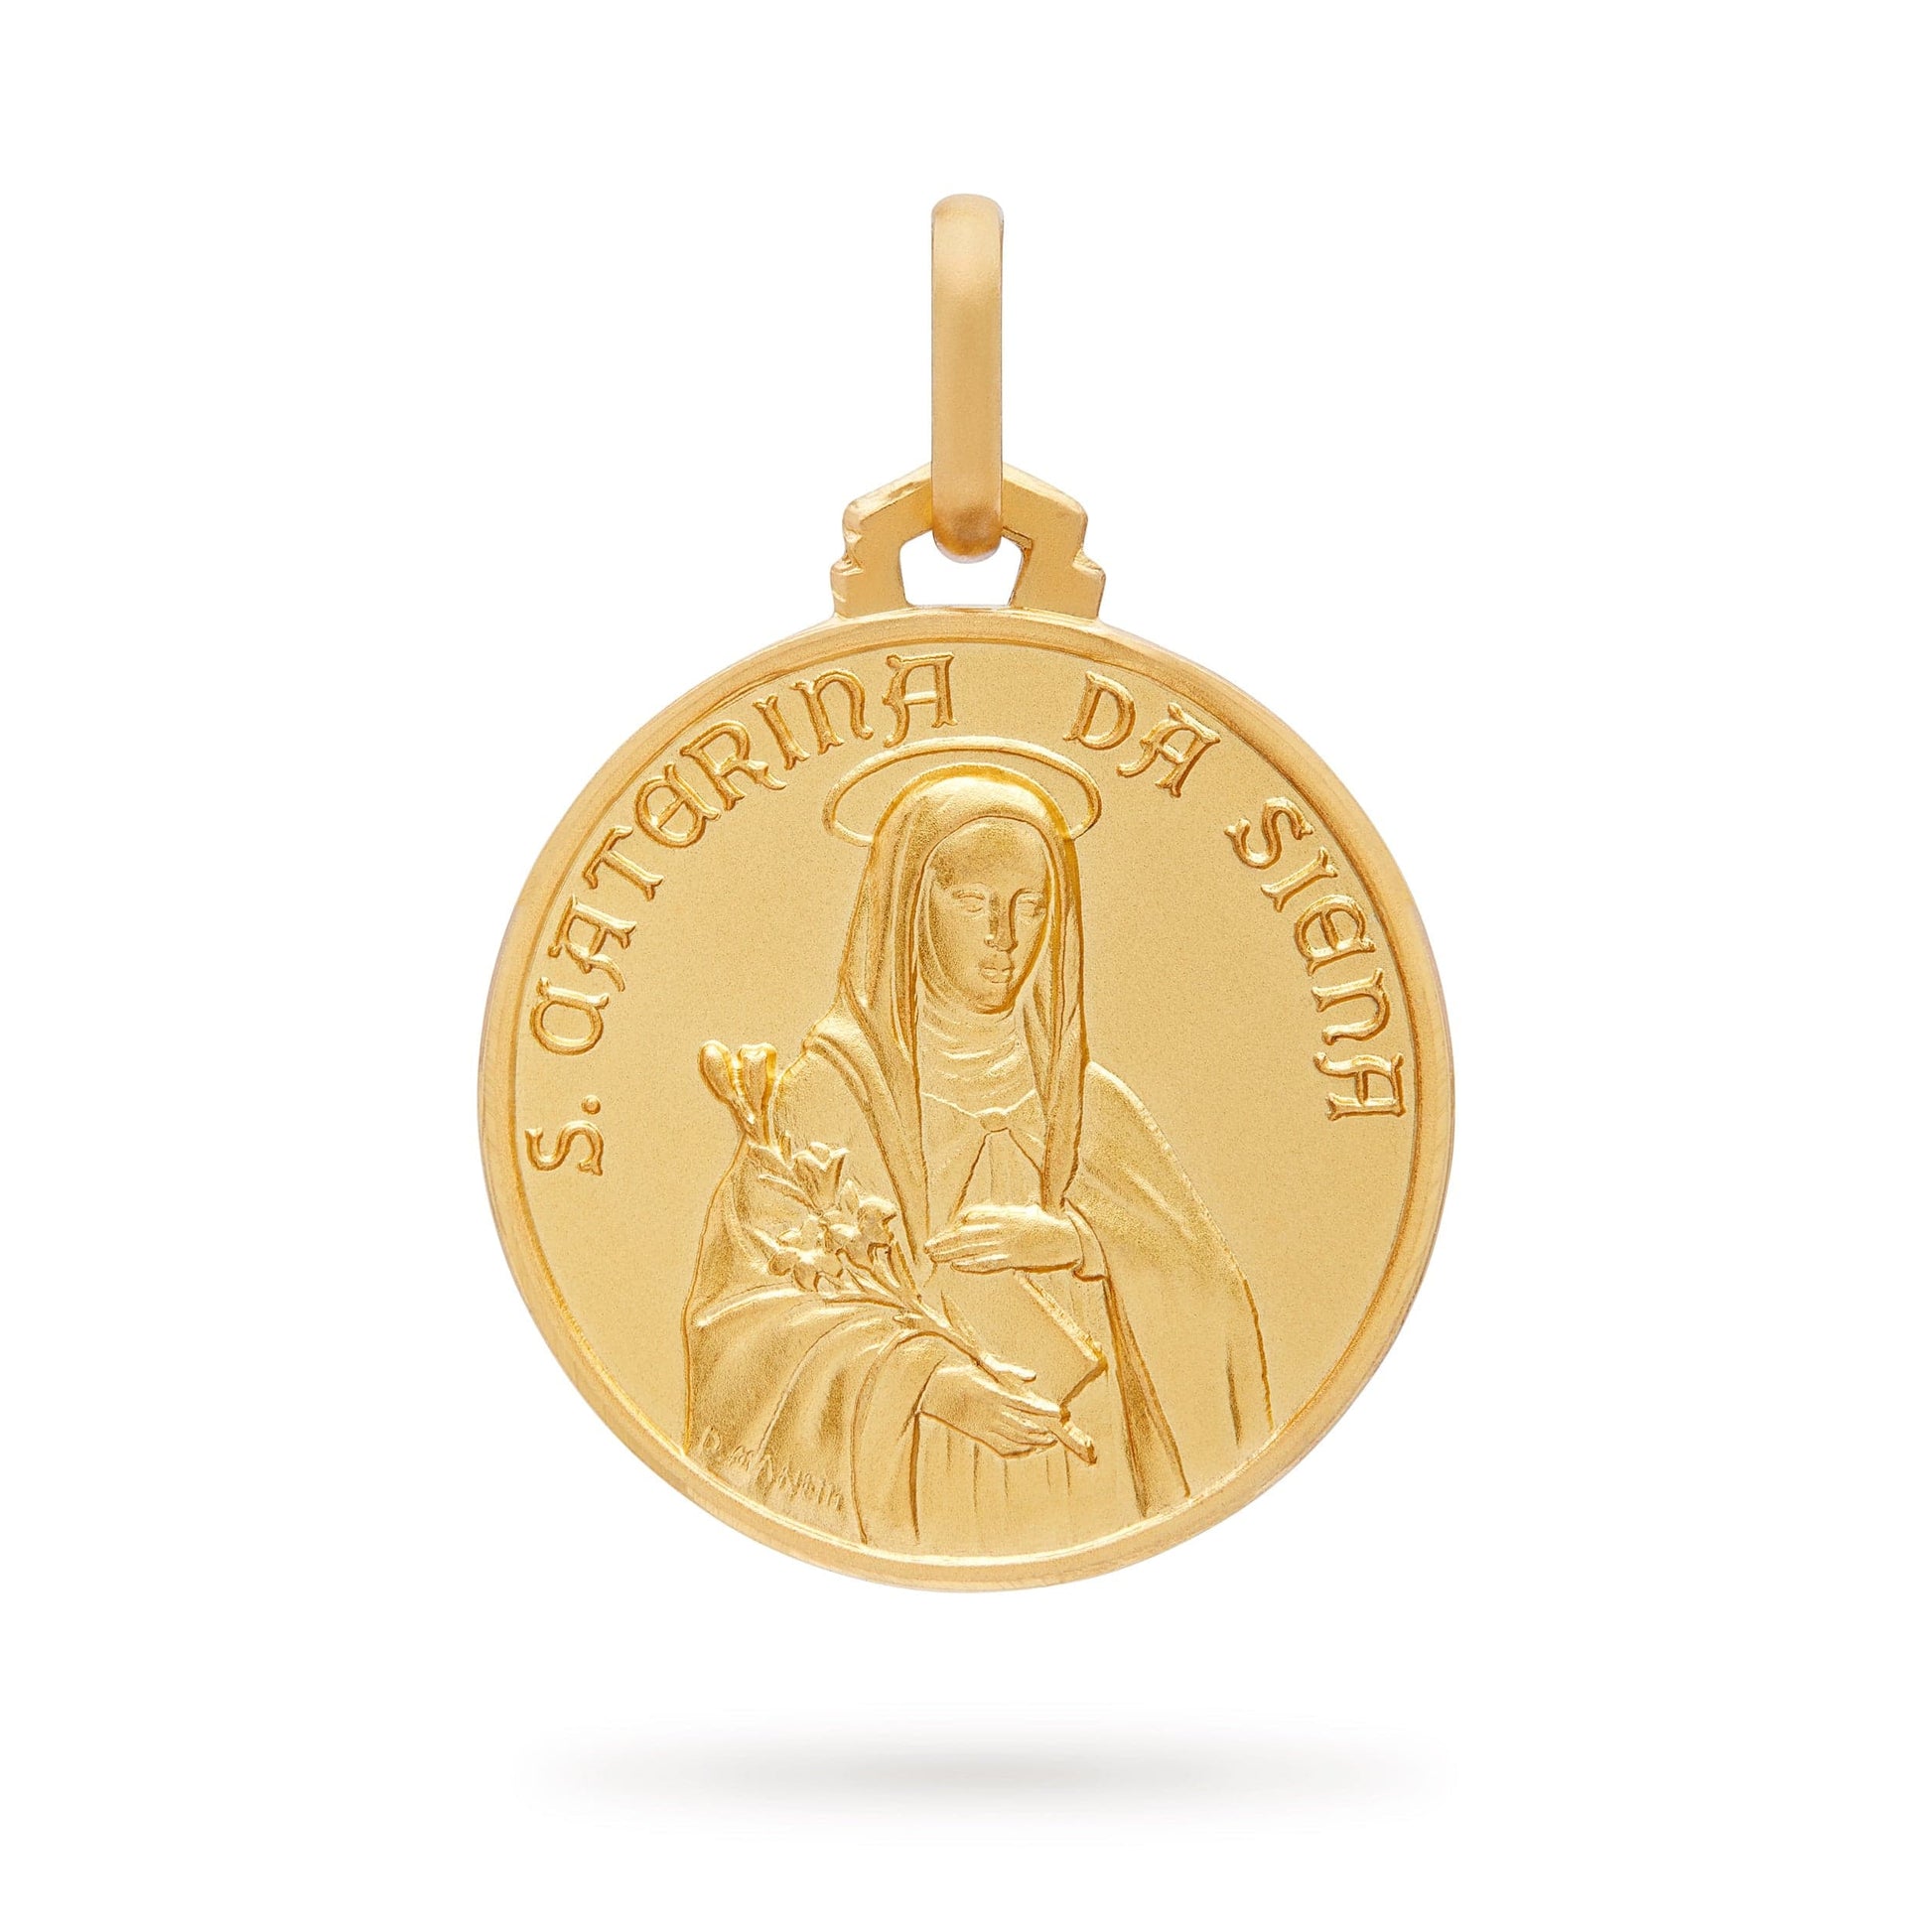 MONDO CATTOLICO Jewelry 18 mm (0.70 in) Gold medal of Saint Catherine of Siena